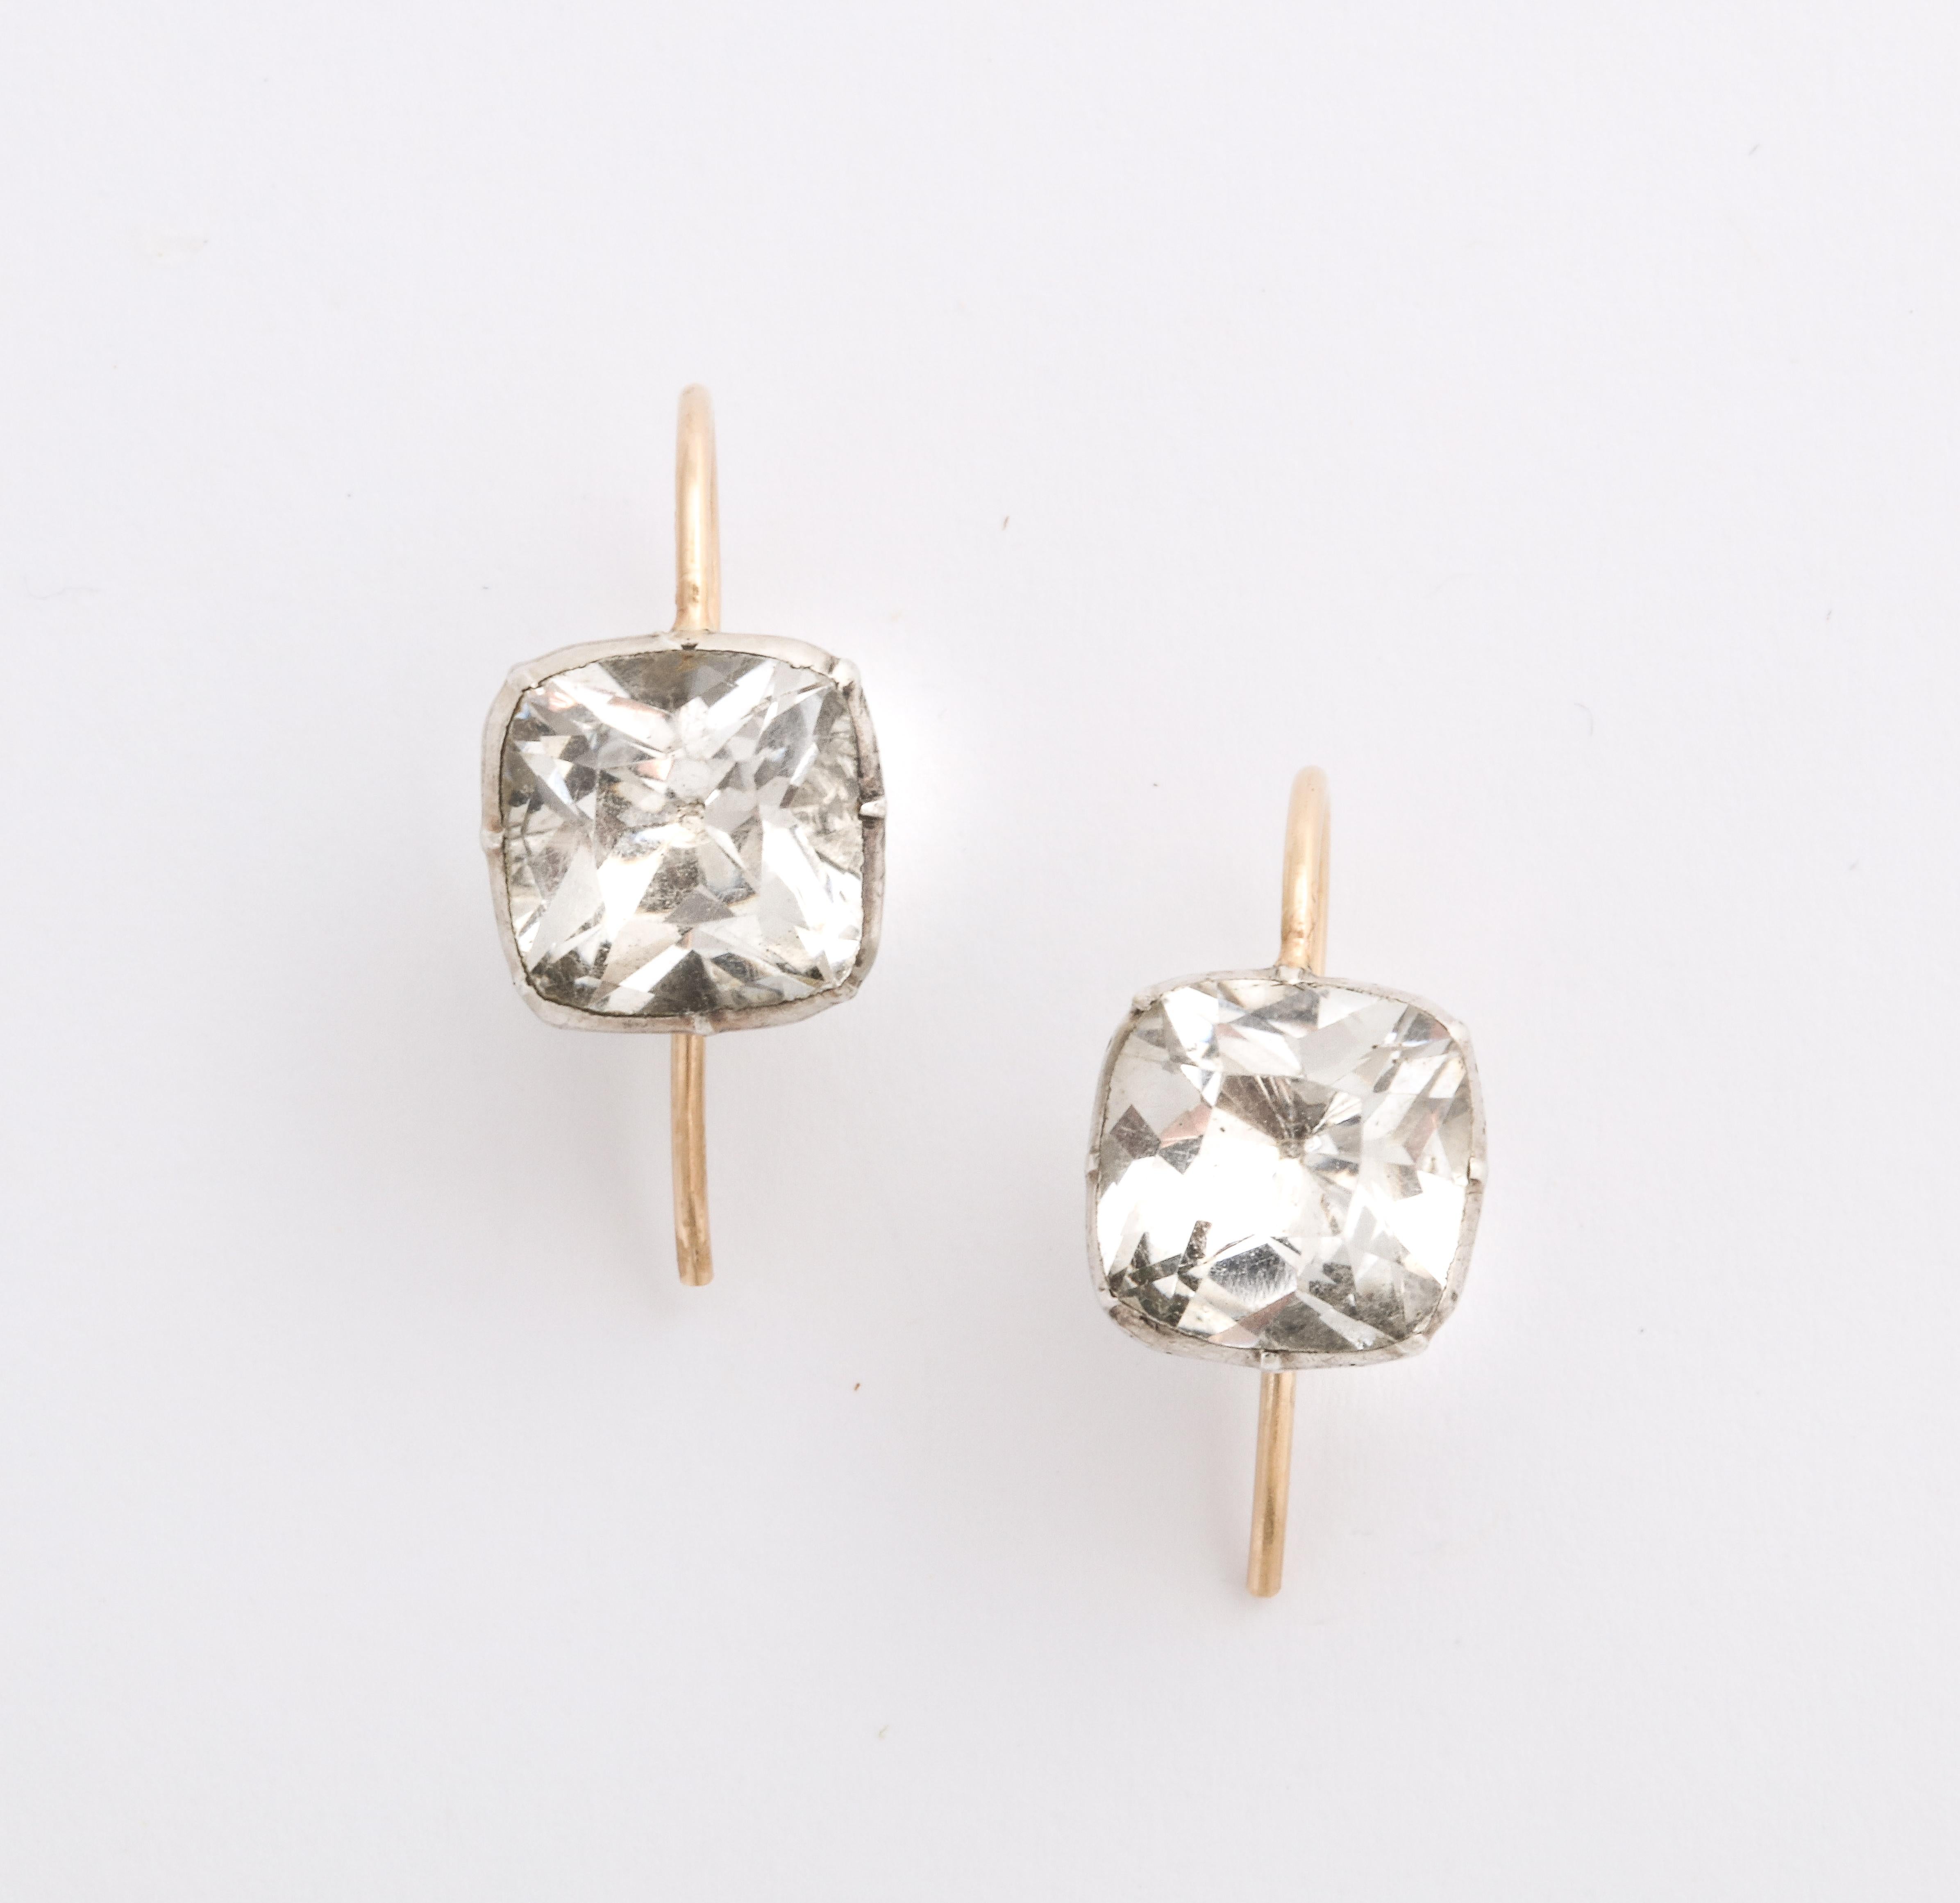 When a touch of glimmer and shimmer is enough to make you smile, this pair Georgian foiled paste earrings of approximately 1.50 Cts each fills the promise. They are in a rare and highly desirable shape and one of our favorite go to earrings for